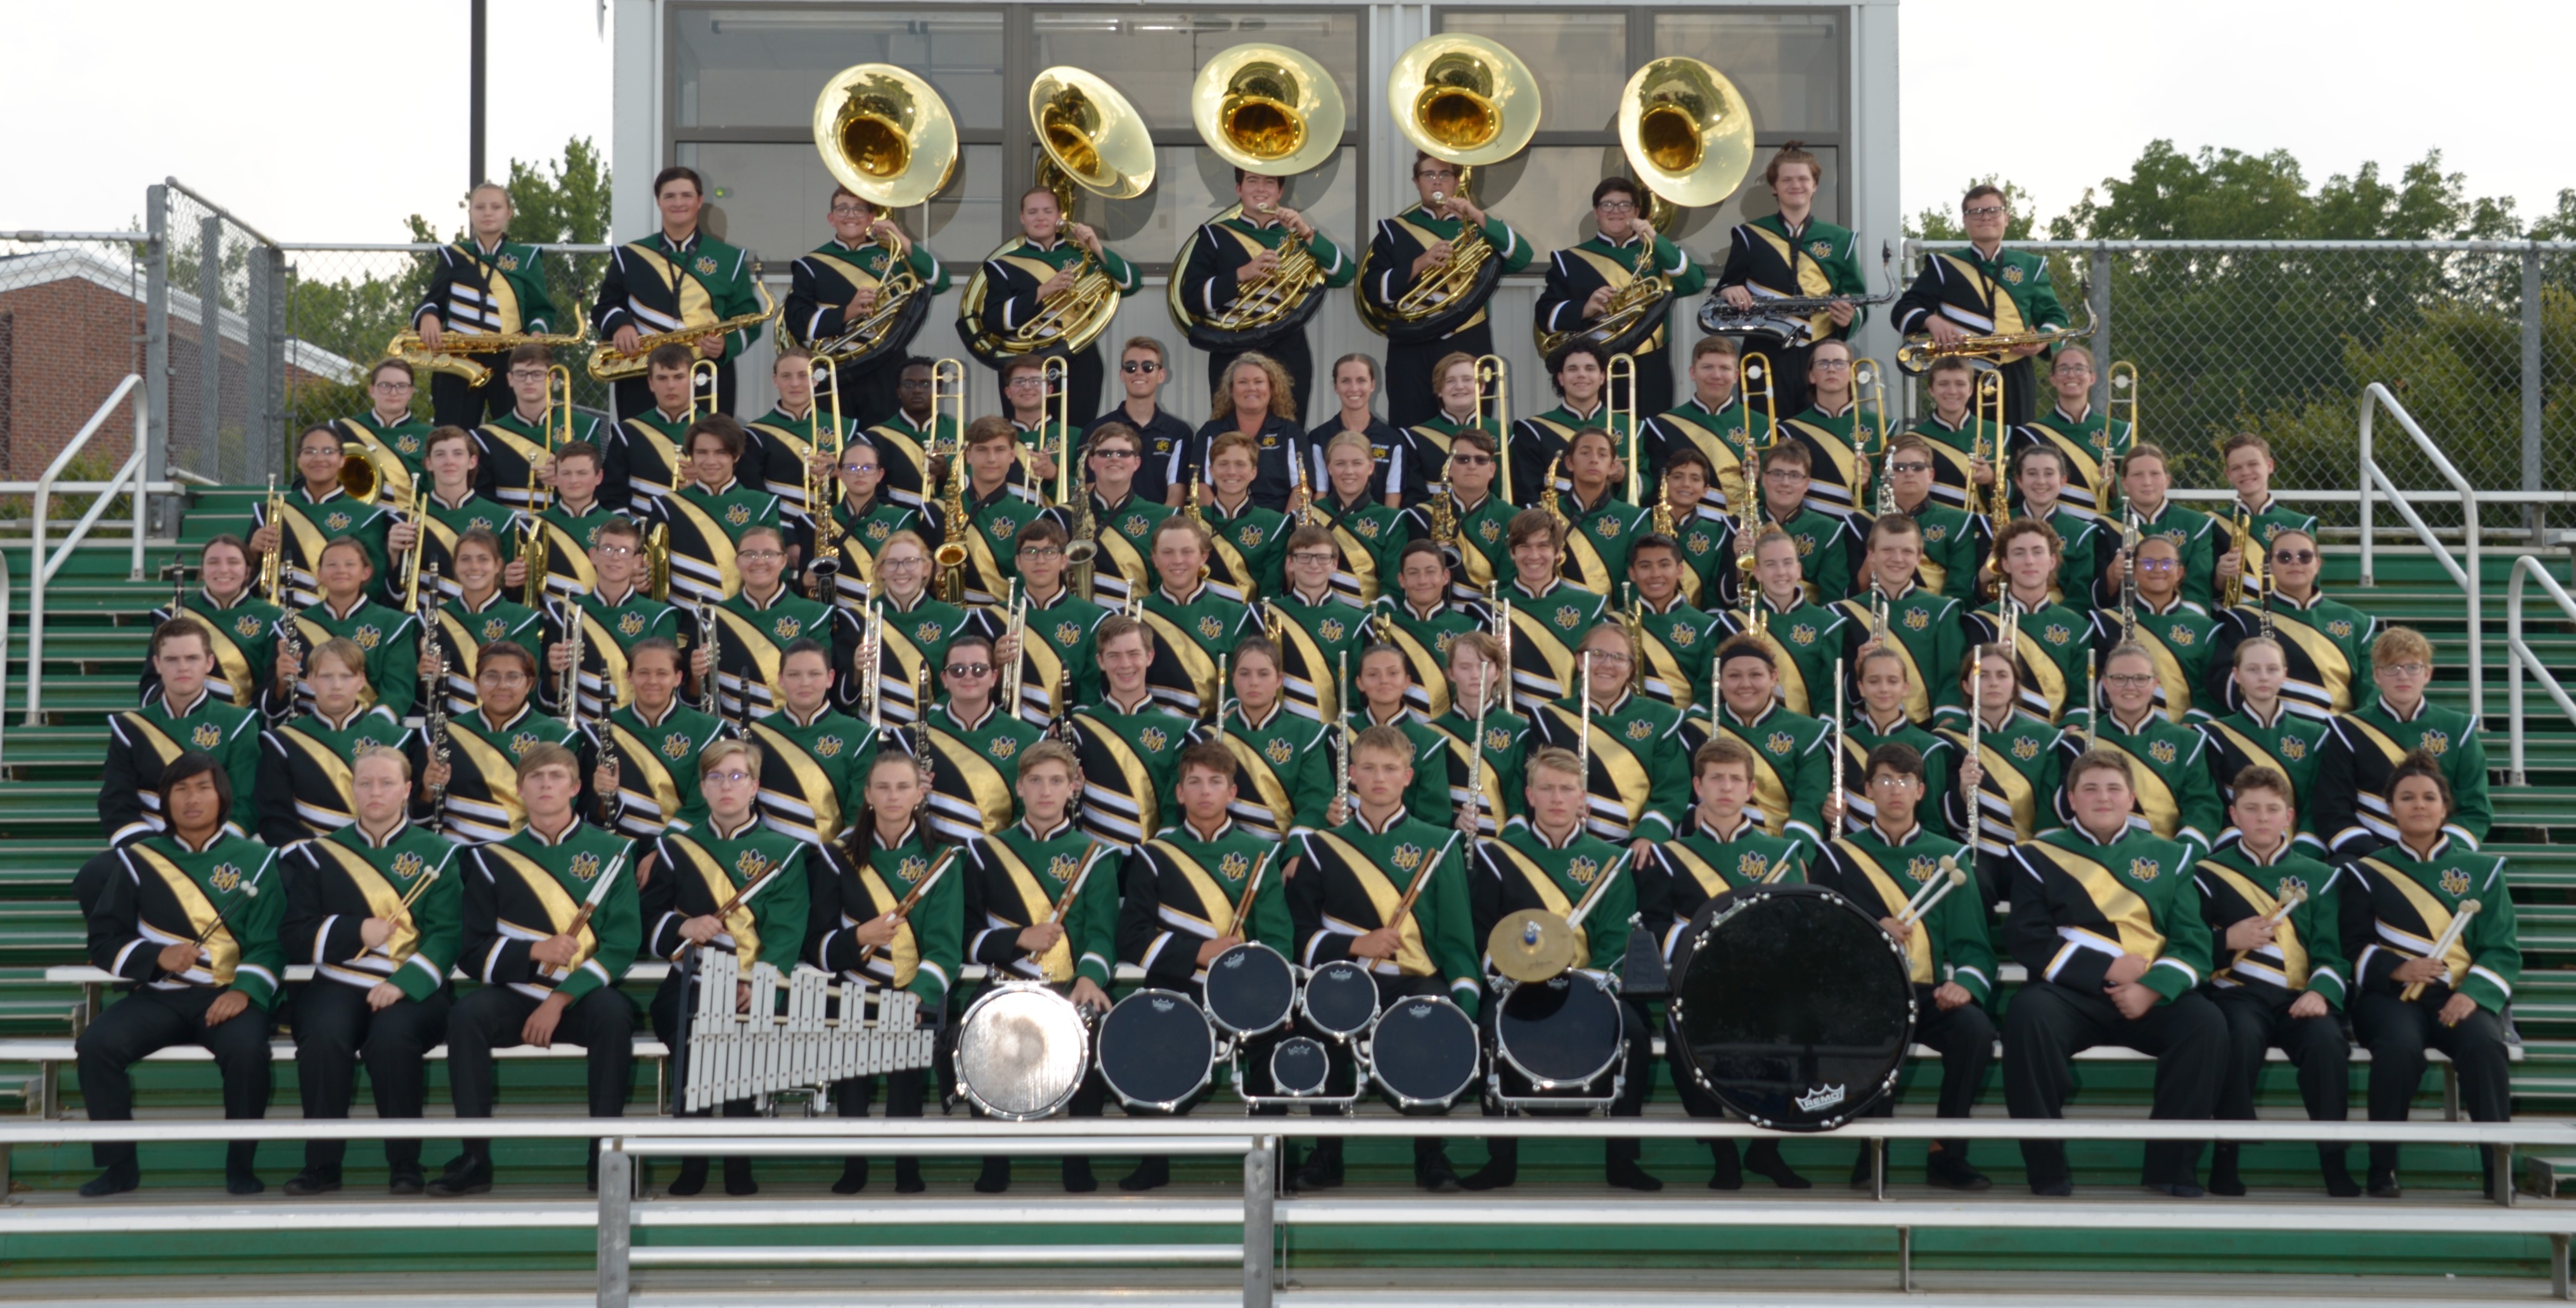 2021 Marching Band